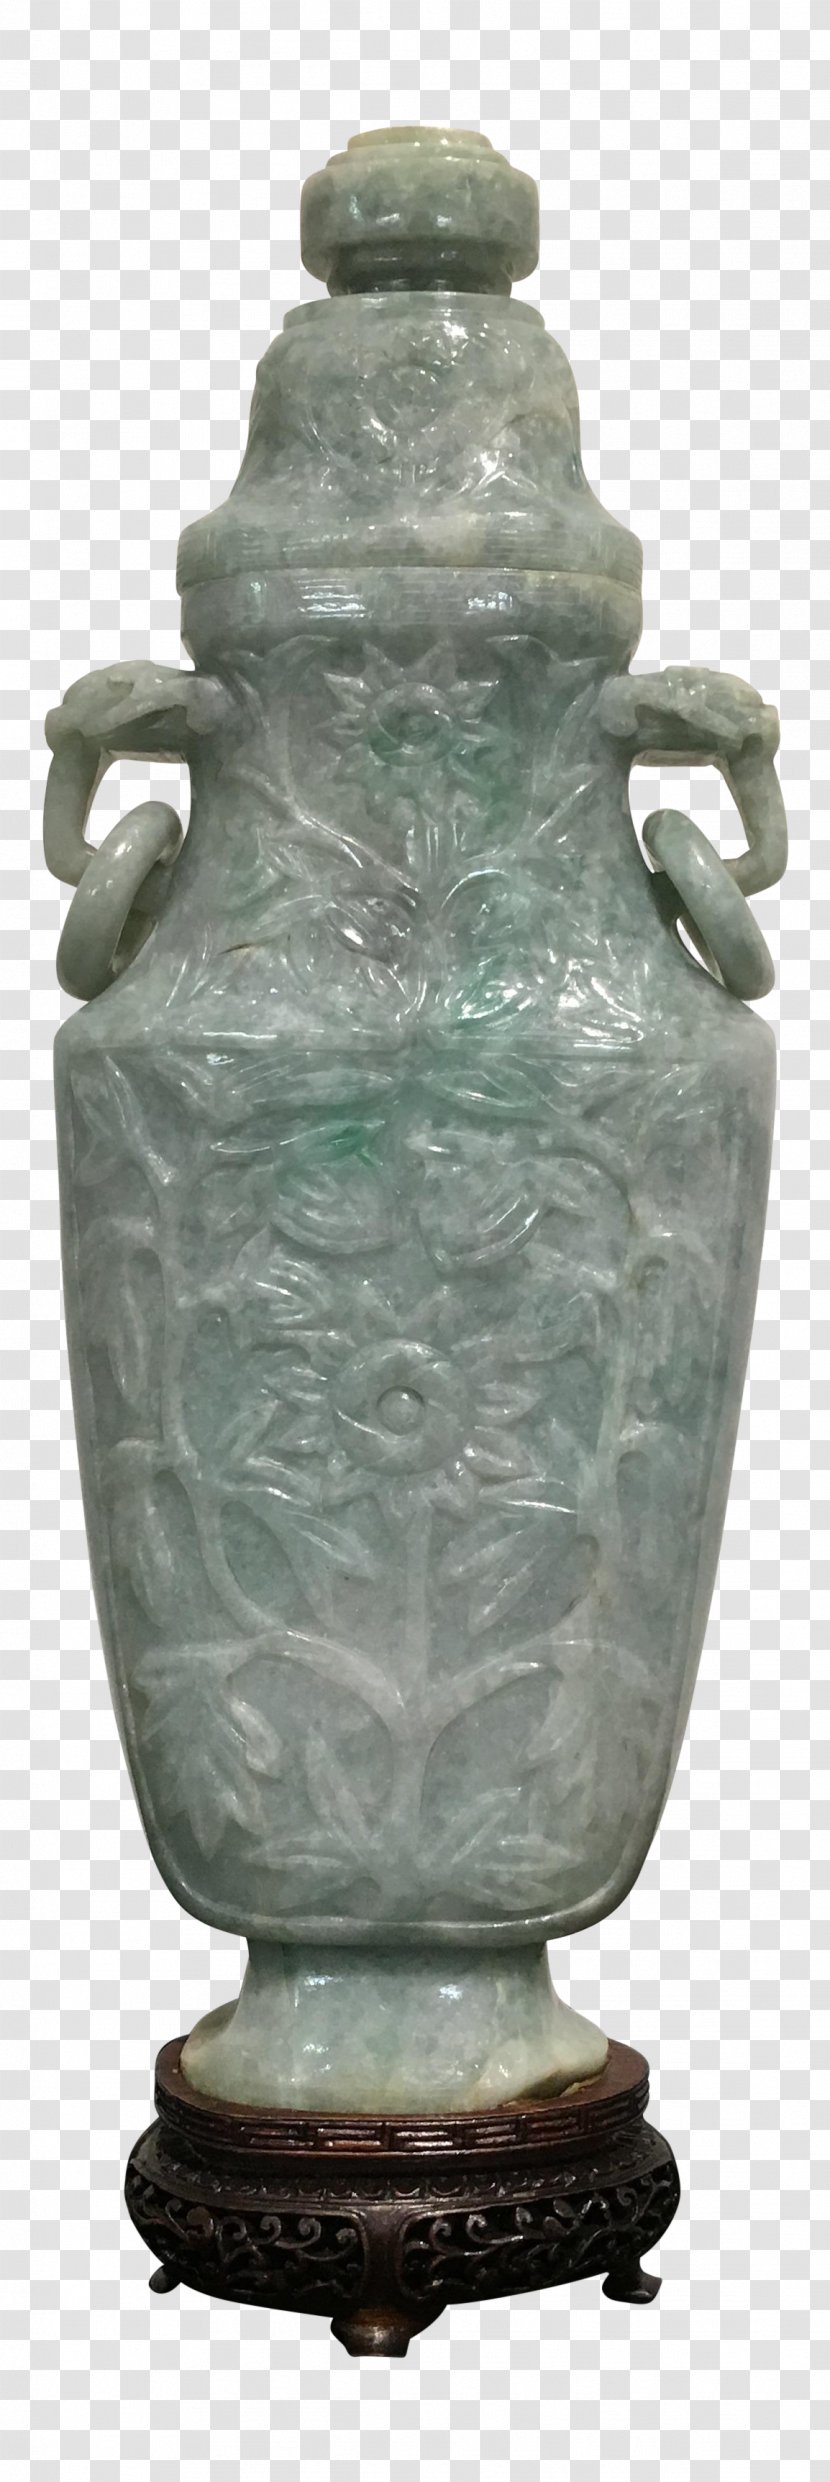 Qing Dynasty Lotus Gallery Vase 19th Century Pottery - Artifact Transparent PNG